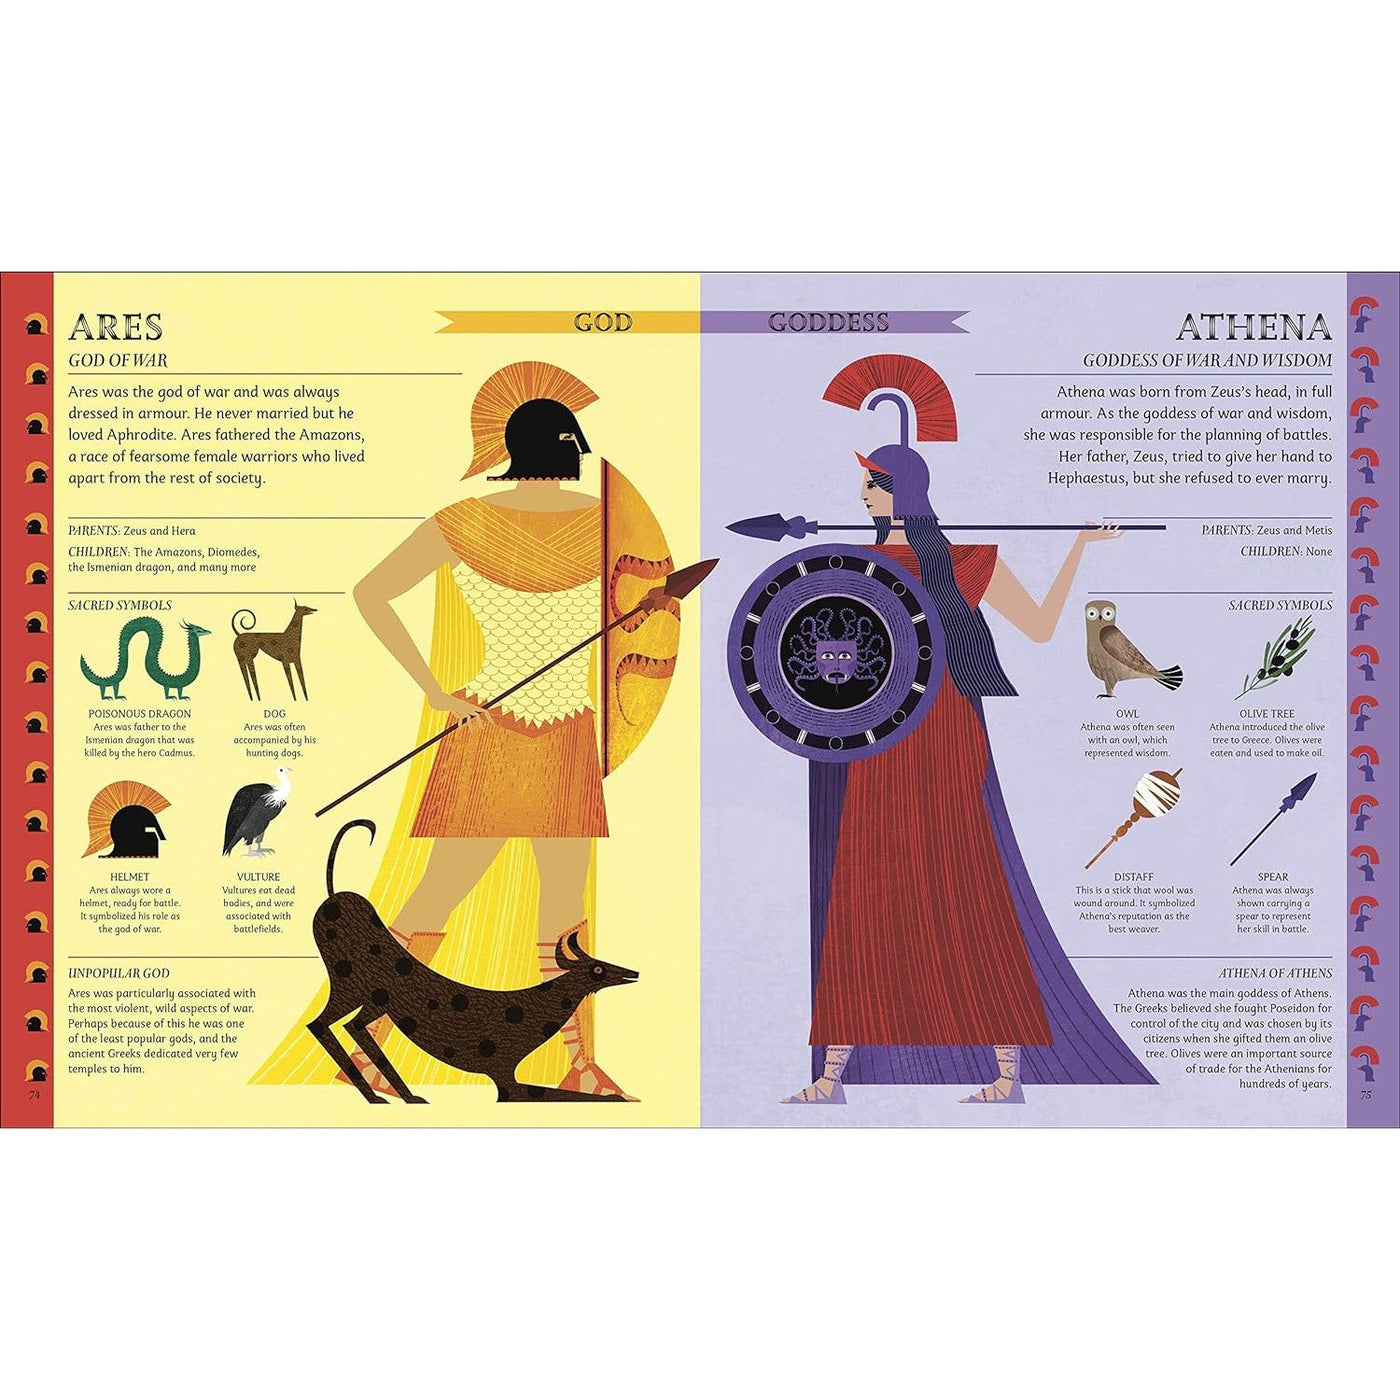 Greek Myths: Meet the Heroes, Gods, and Monsters of Ancient Greece-Books-DK Children-Yes Bebe